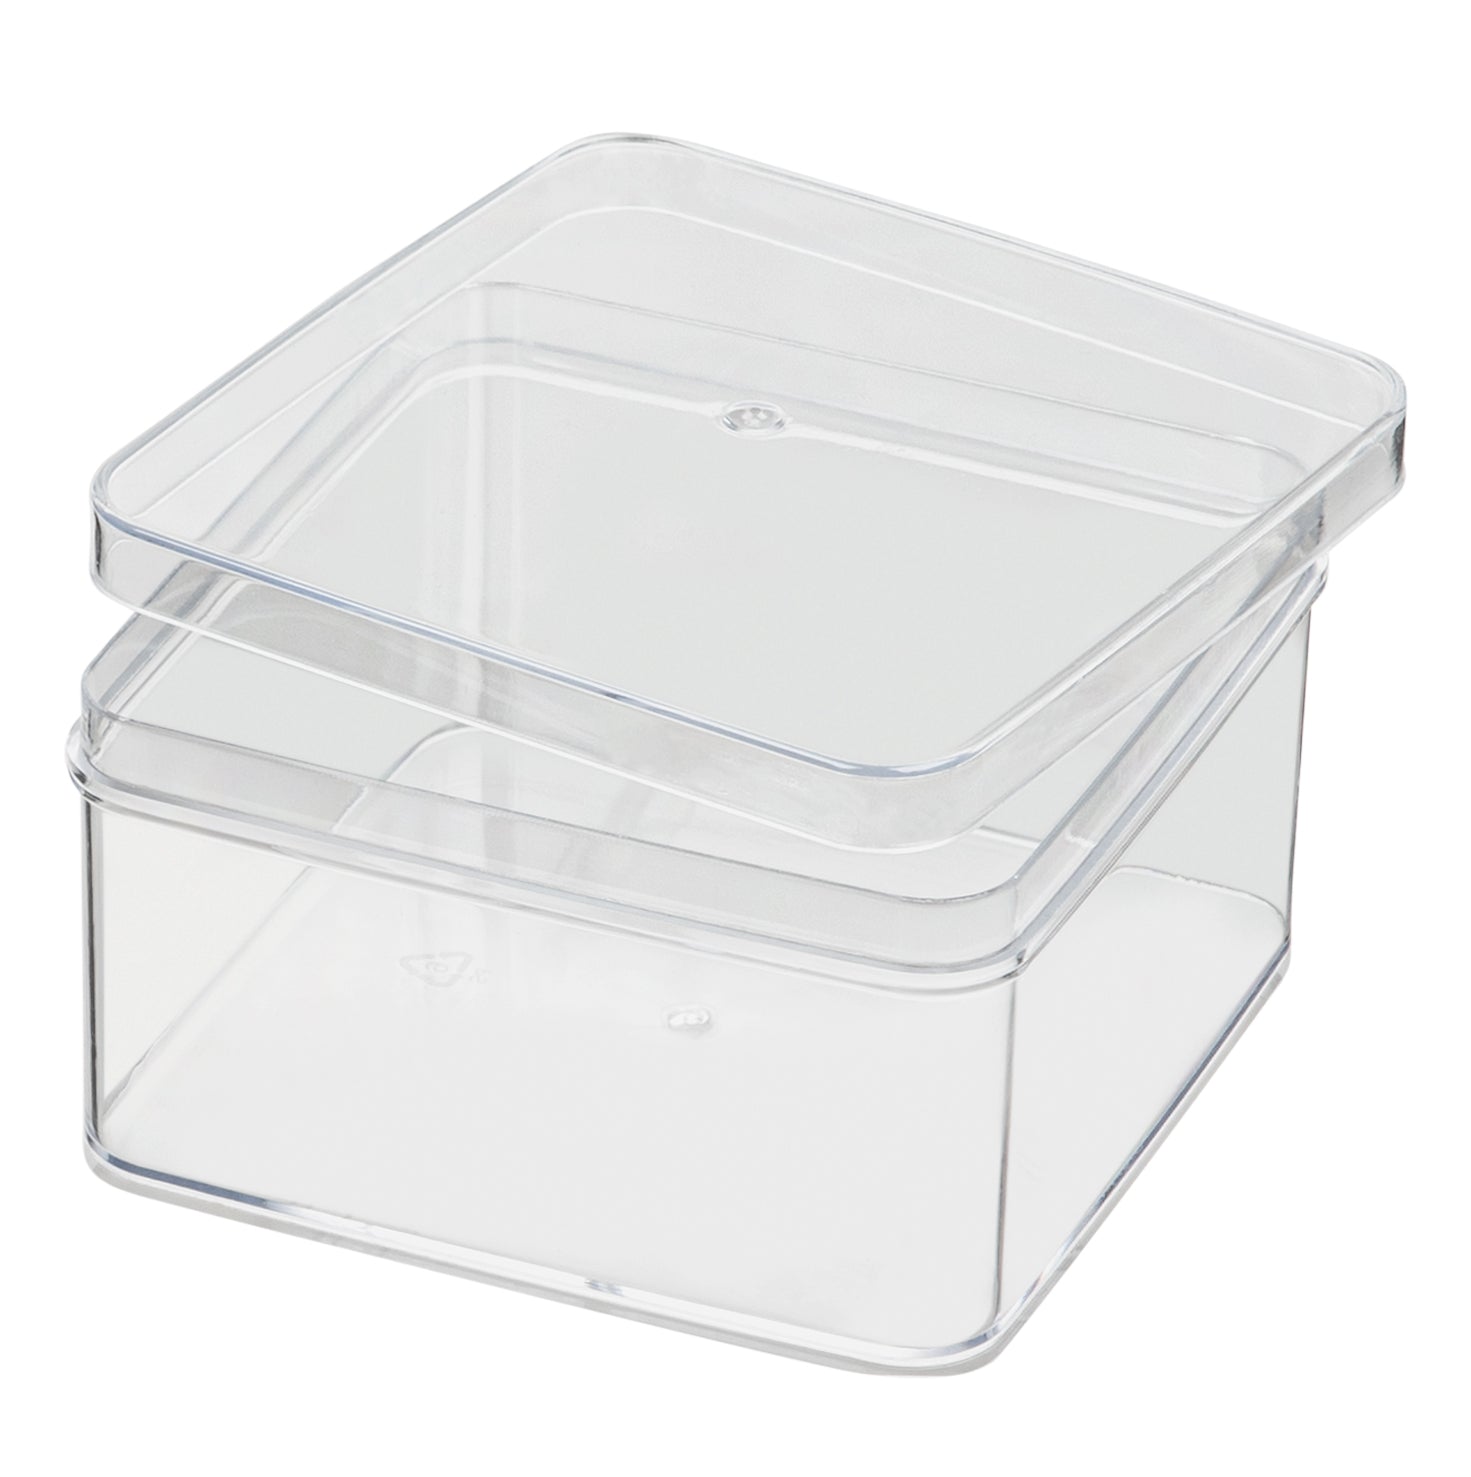 Hammont Clear Acrylic Boxes Round 12 Pack 2.75x3.75